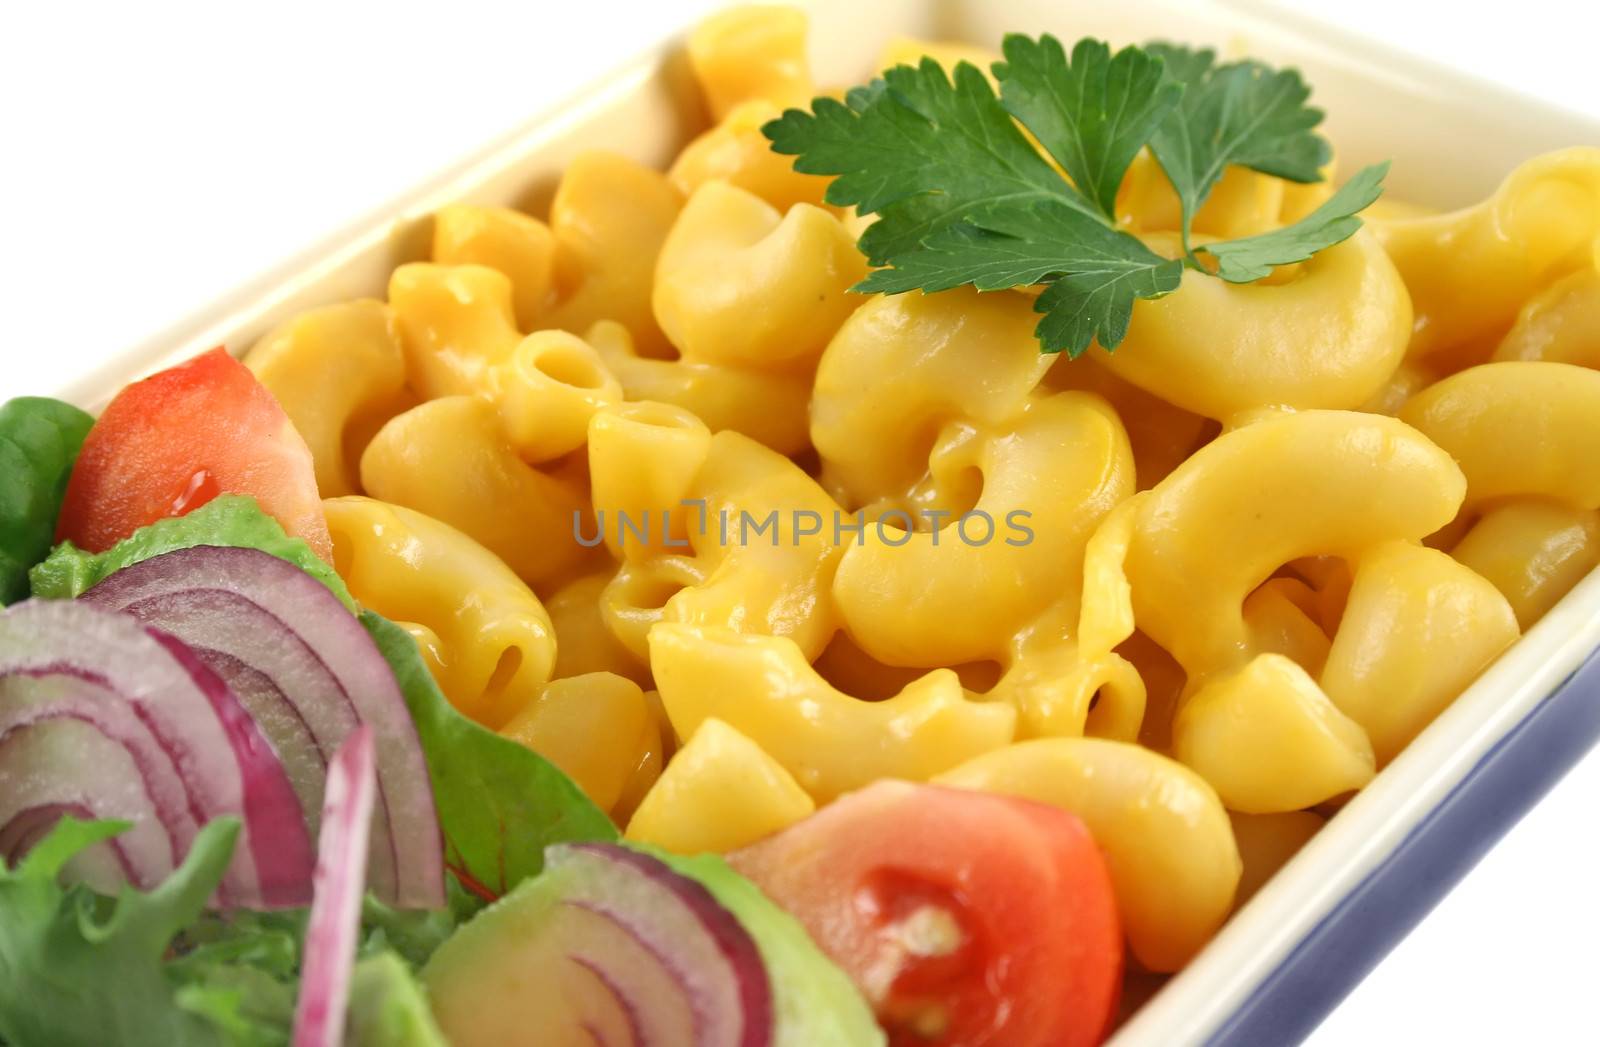 Macaroni cheese and a fresh red onion garden salad ready to serve.